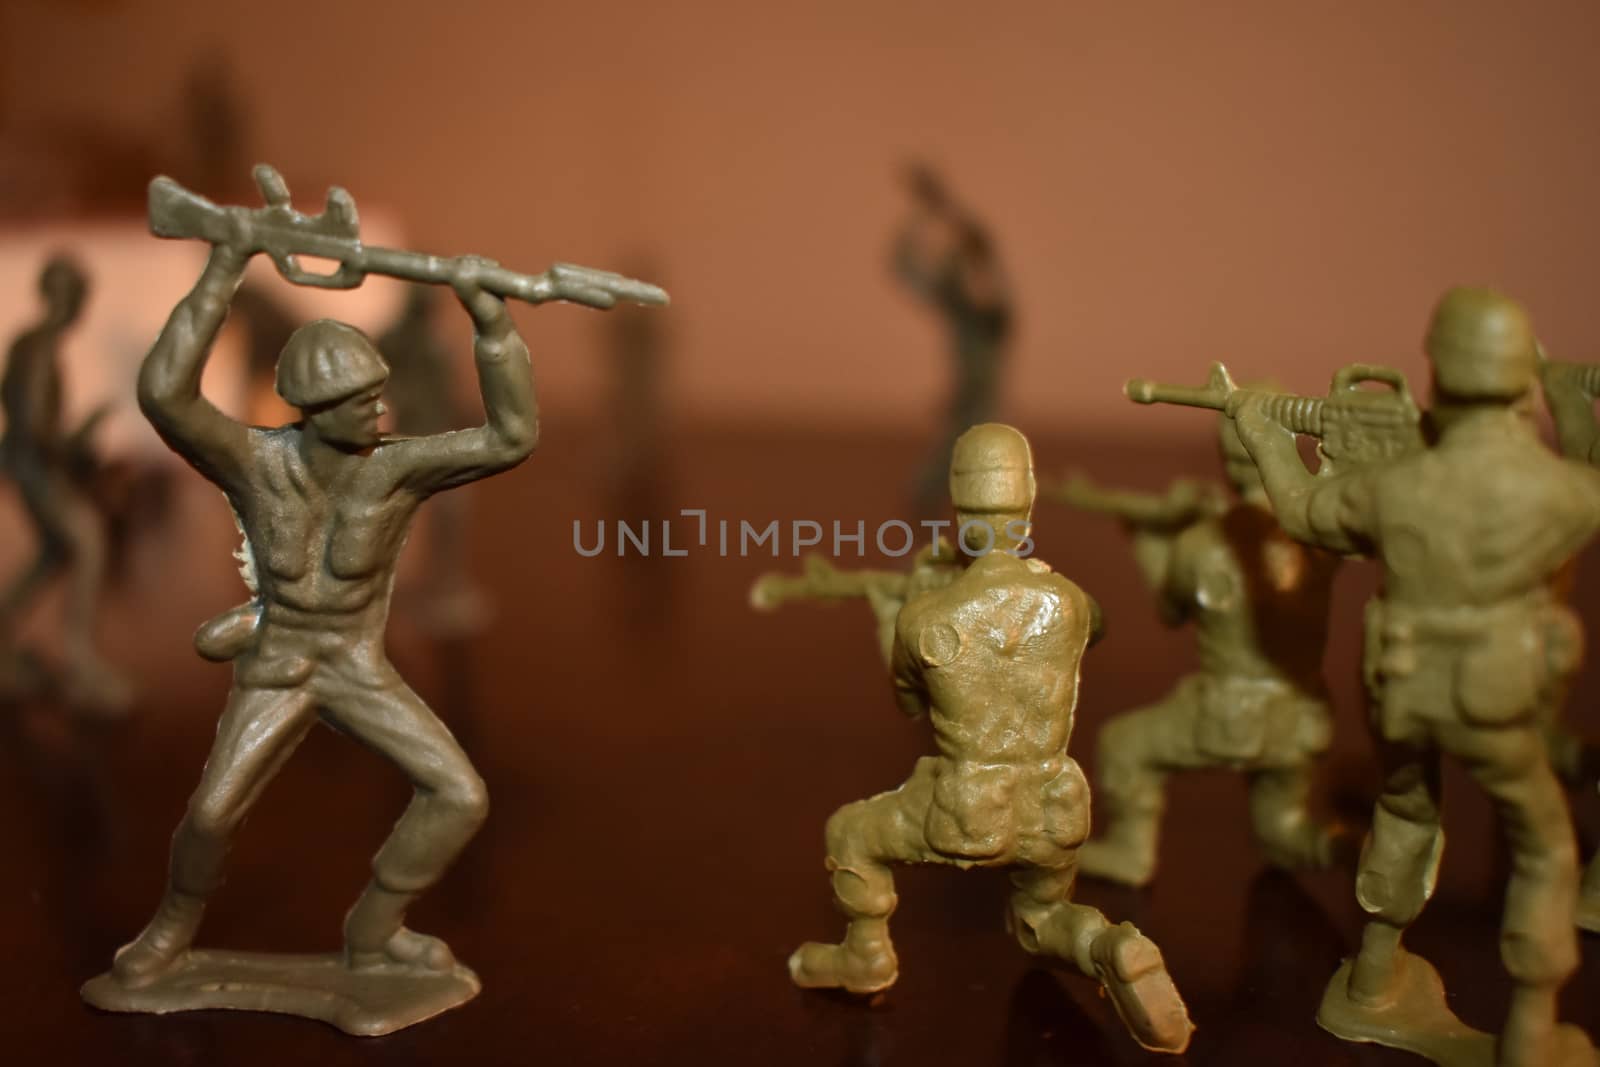 Toy Soldiers Doing Battle on a Wooden Surface by bju12290